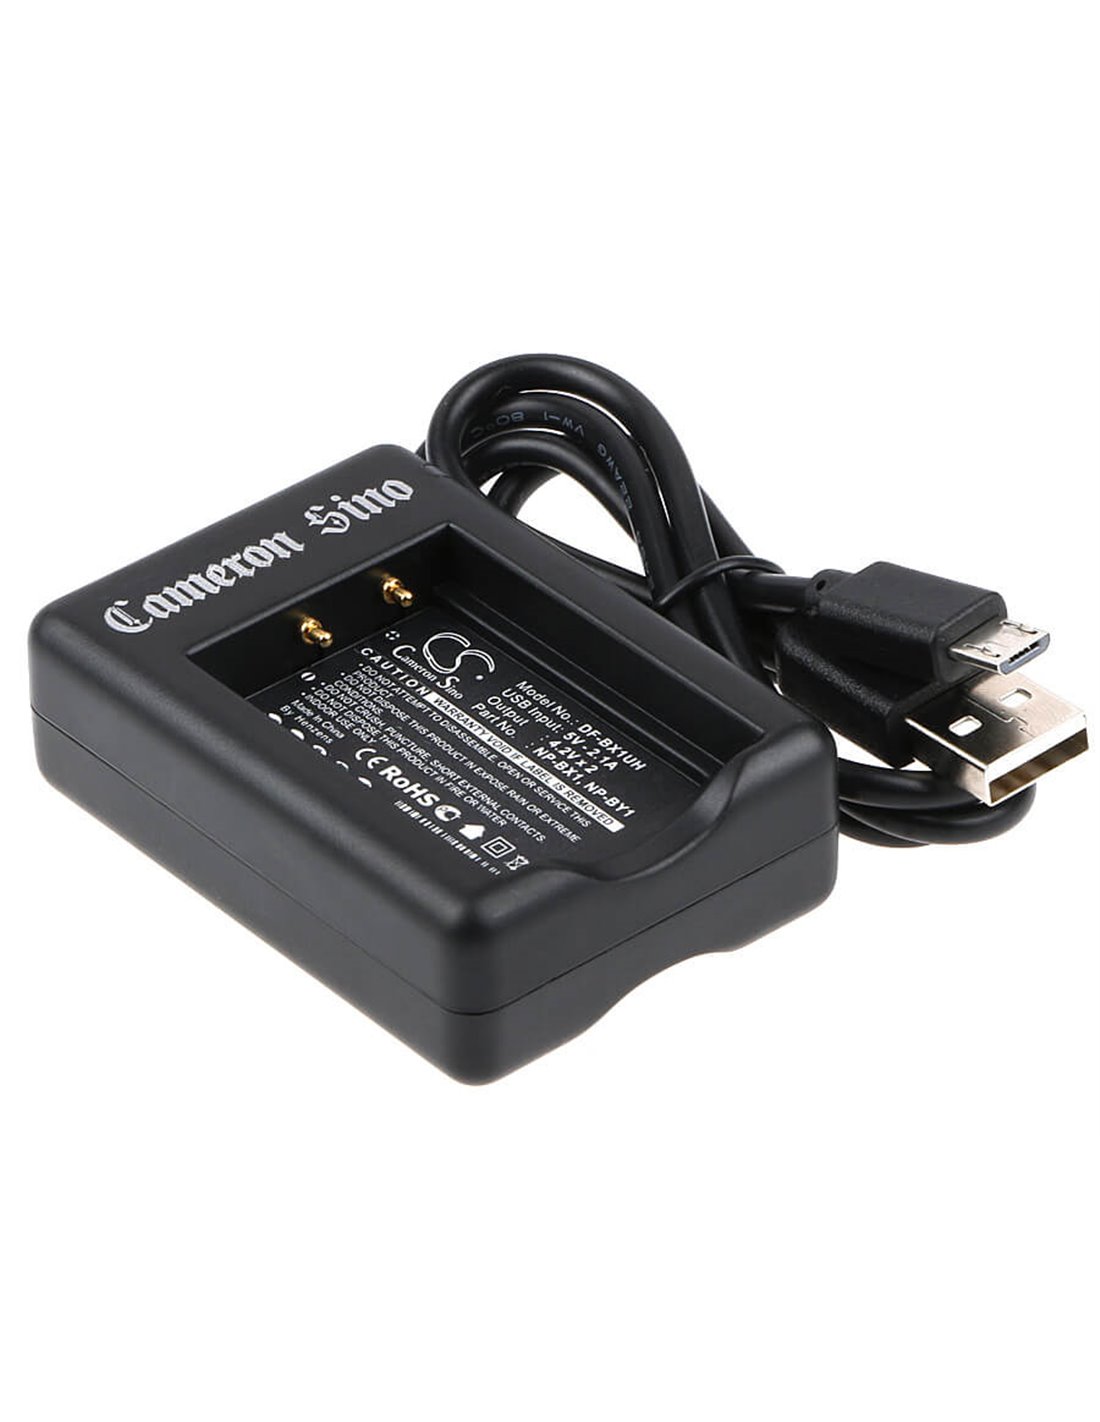 Sony Bc-csxb, Bc-dcy, Np-bx1 Camera Charger